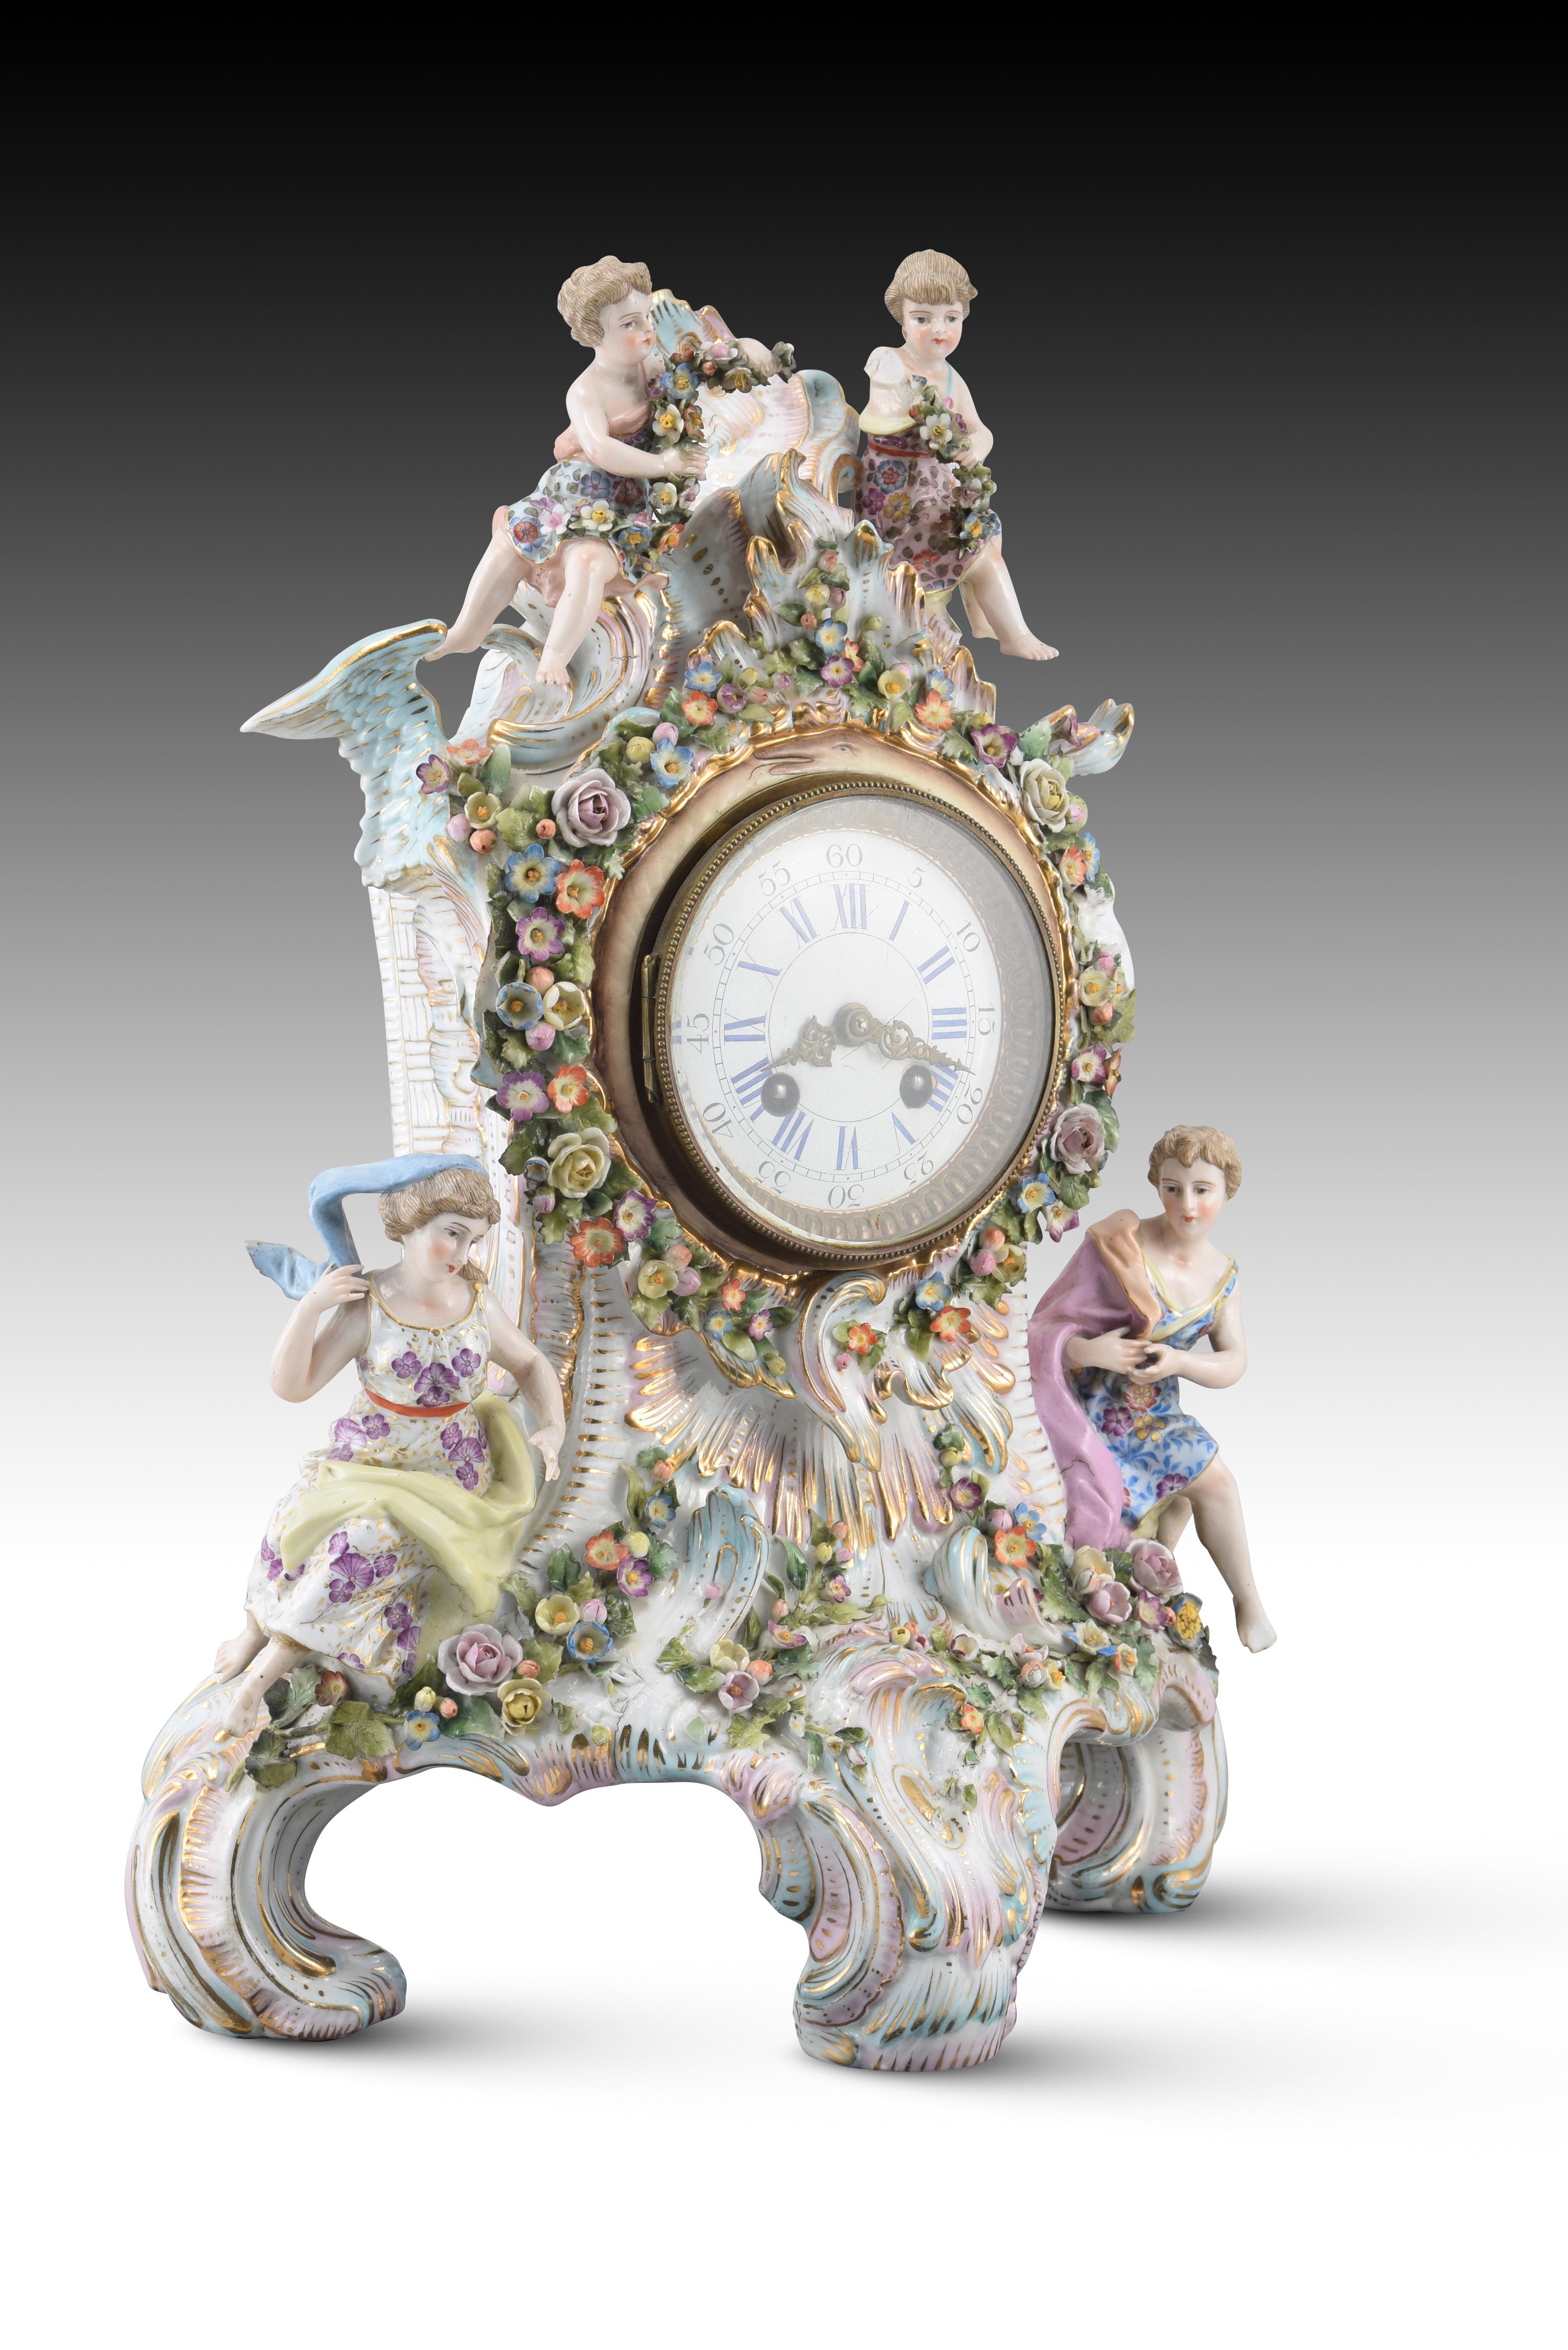 Metal Clock. Porcelain, metal, glass. Lenzkirch, Germany, late 19th century. 